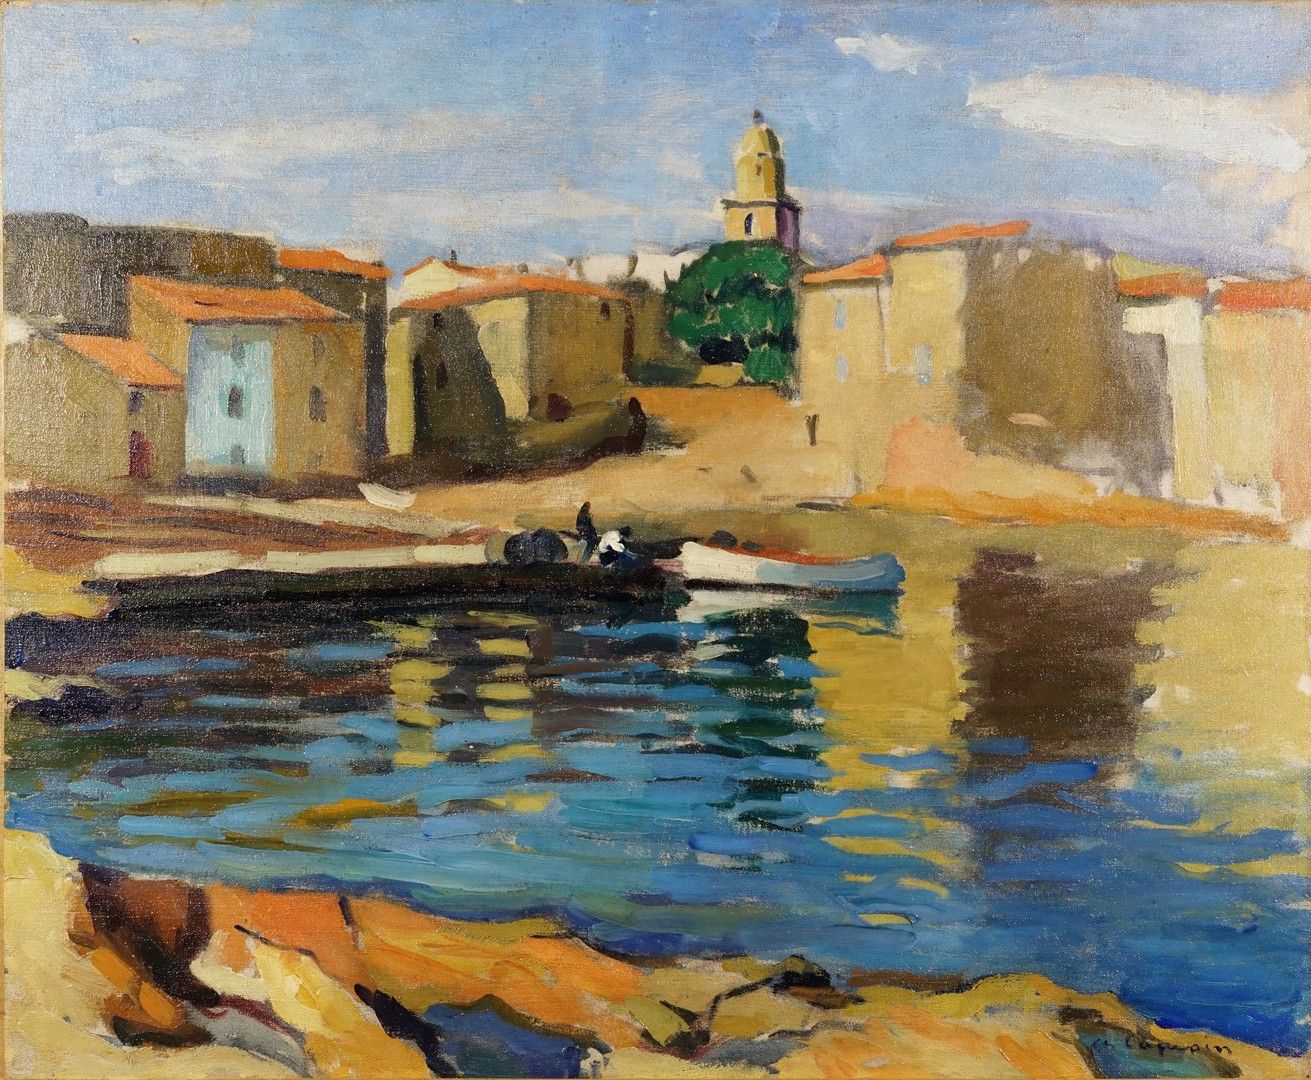 Charles CAMOIN (1879-1965) The Port of the Ponche, Saint Tropez, 1905
Oil on can&hellip;